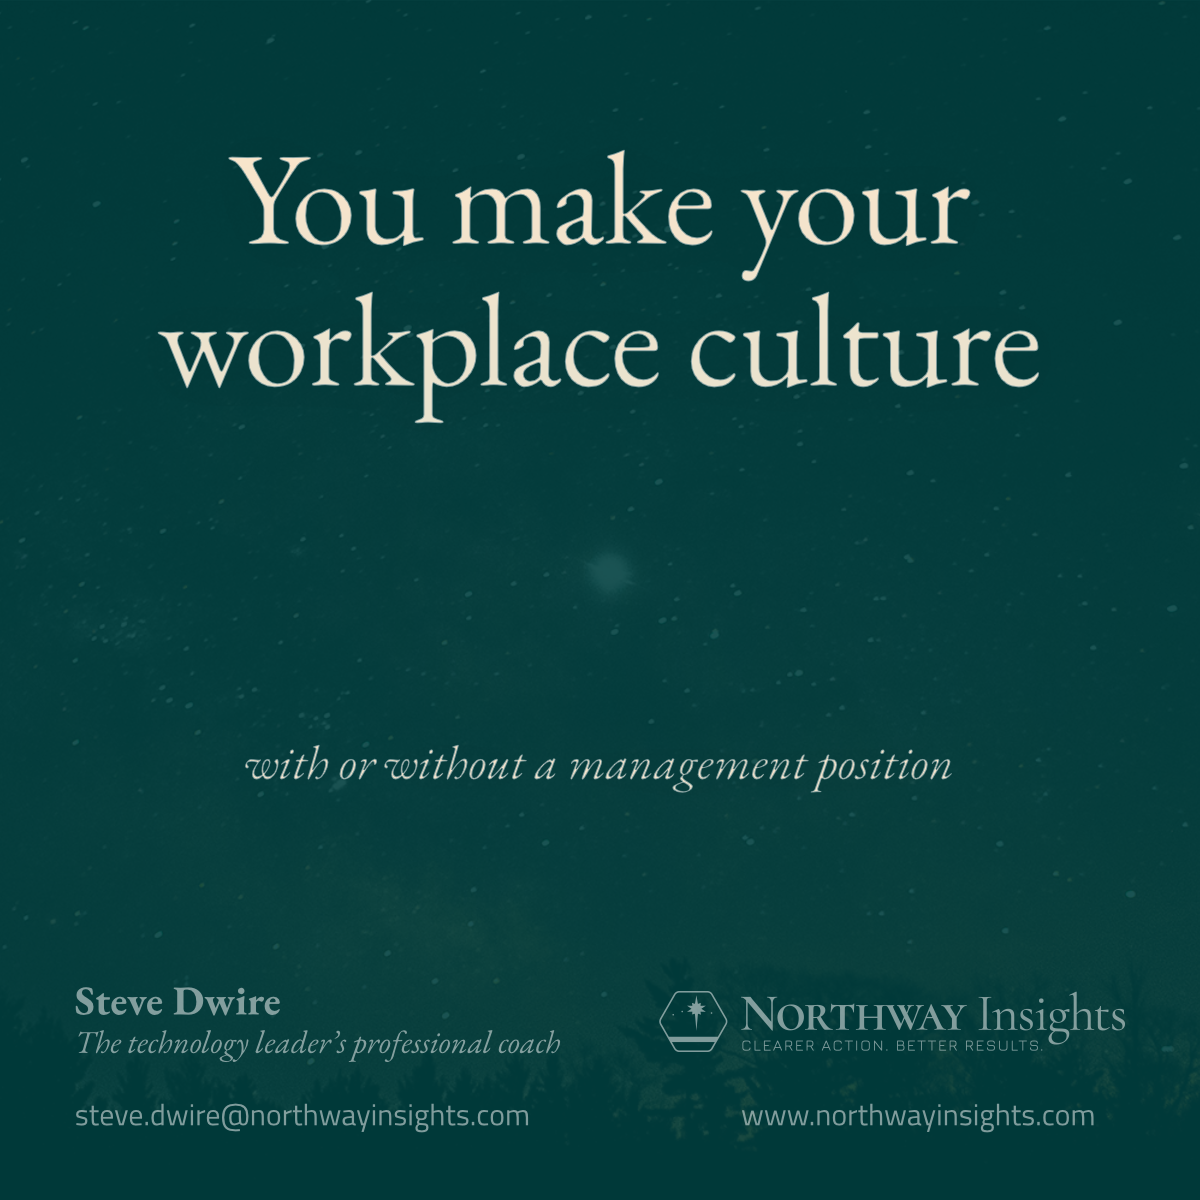 You make your workplace culture